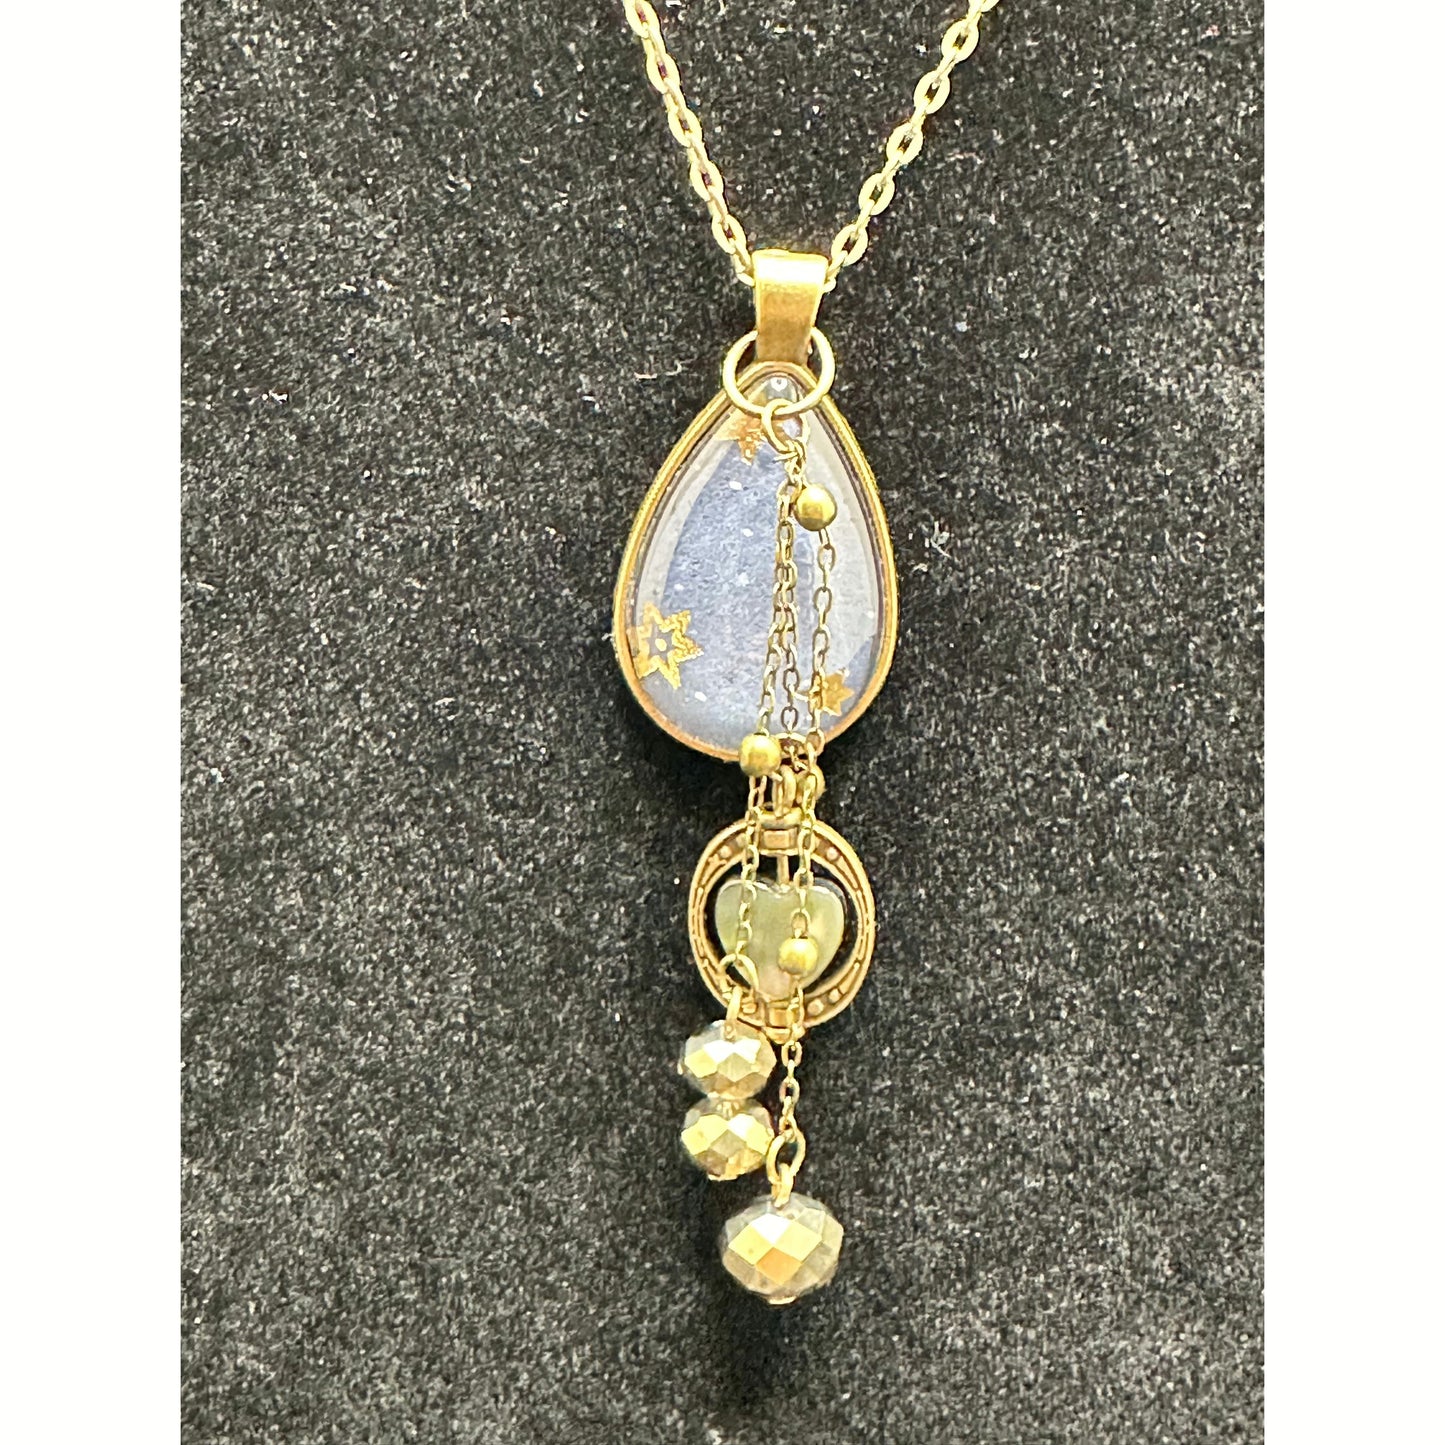 Dewdrop 3 Pendant Necklace - Rhapsody and Renascence